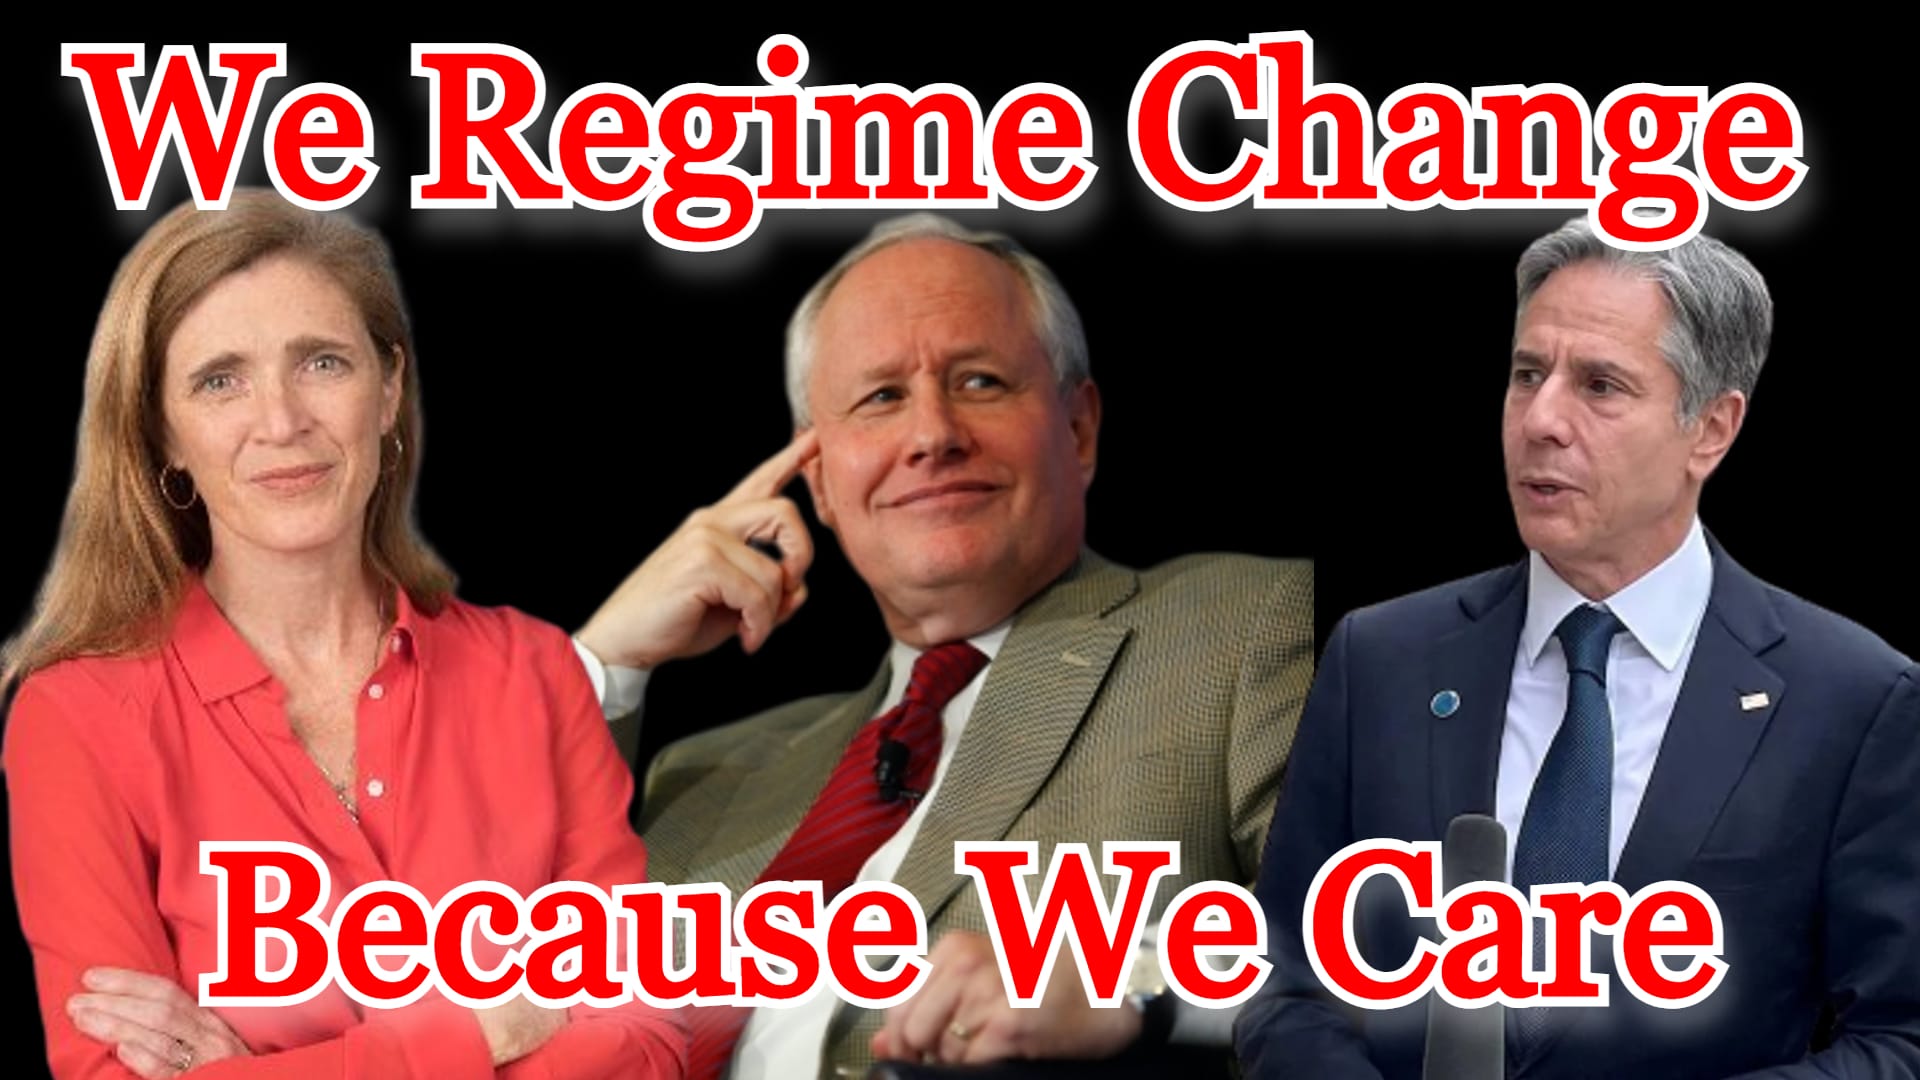 COI #373: We Regime Change Because We Care